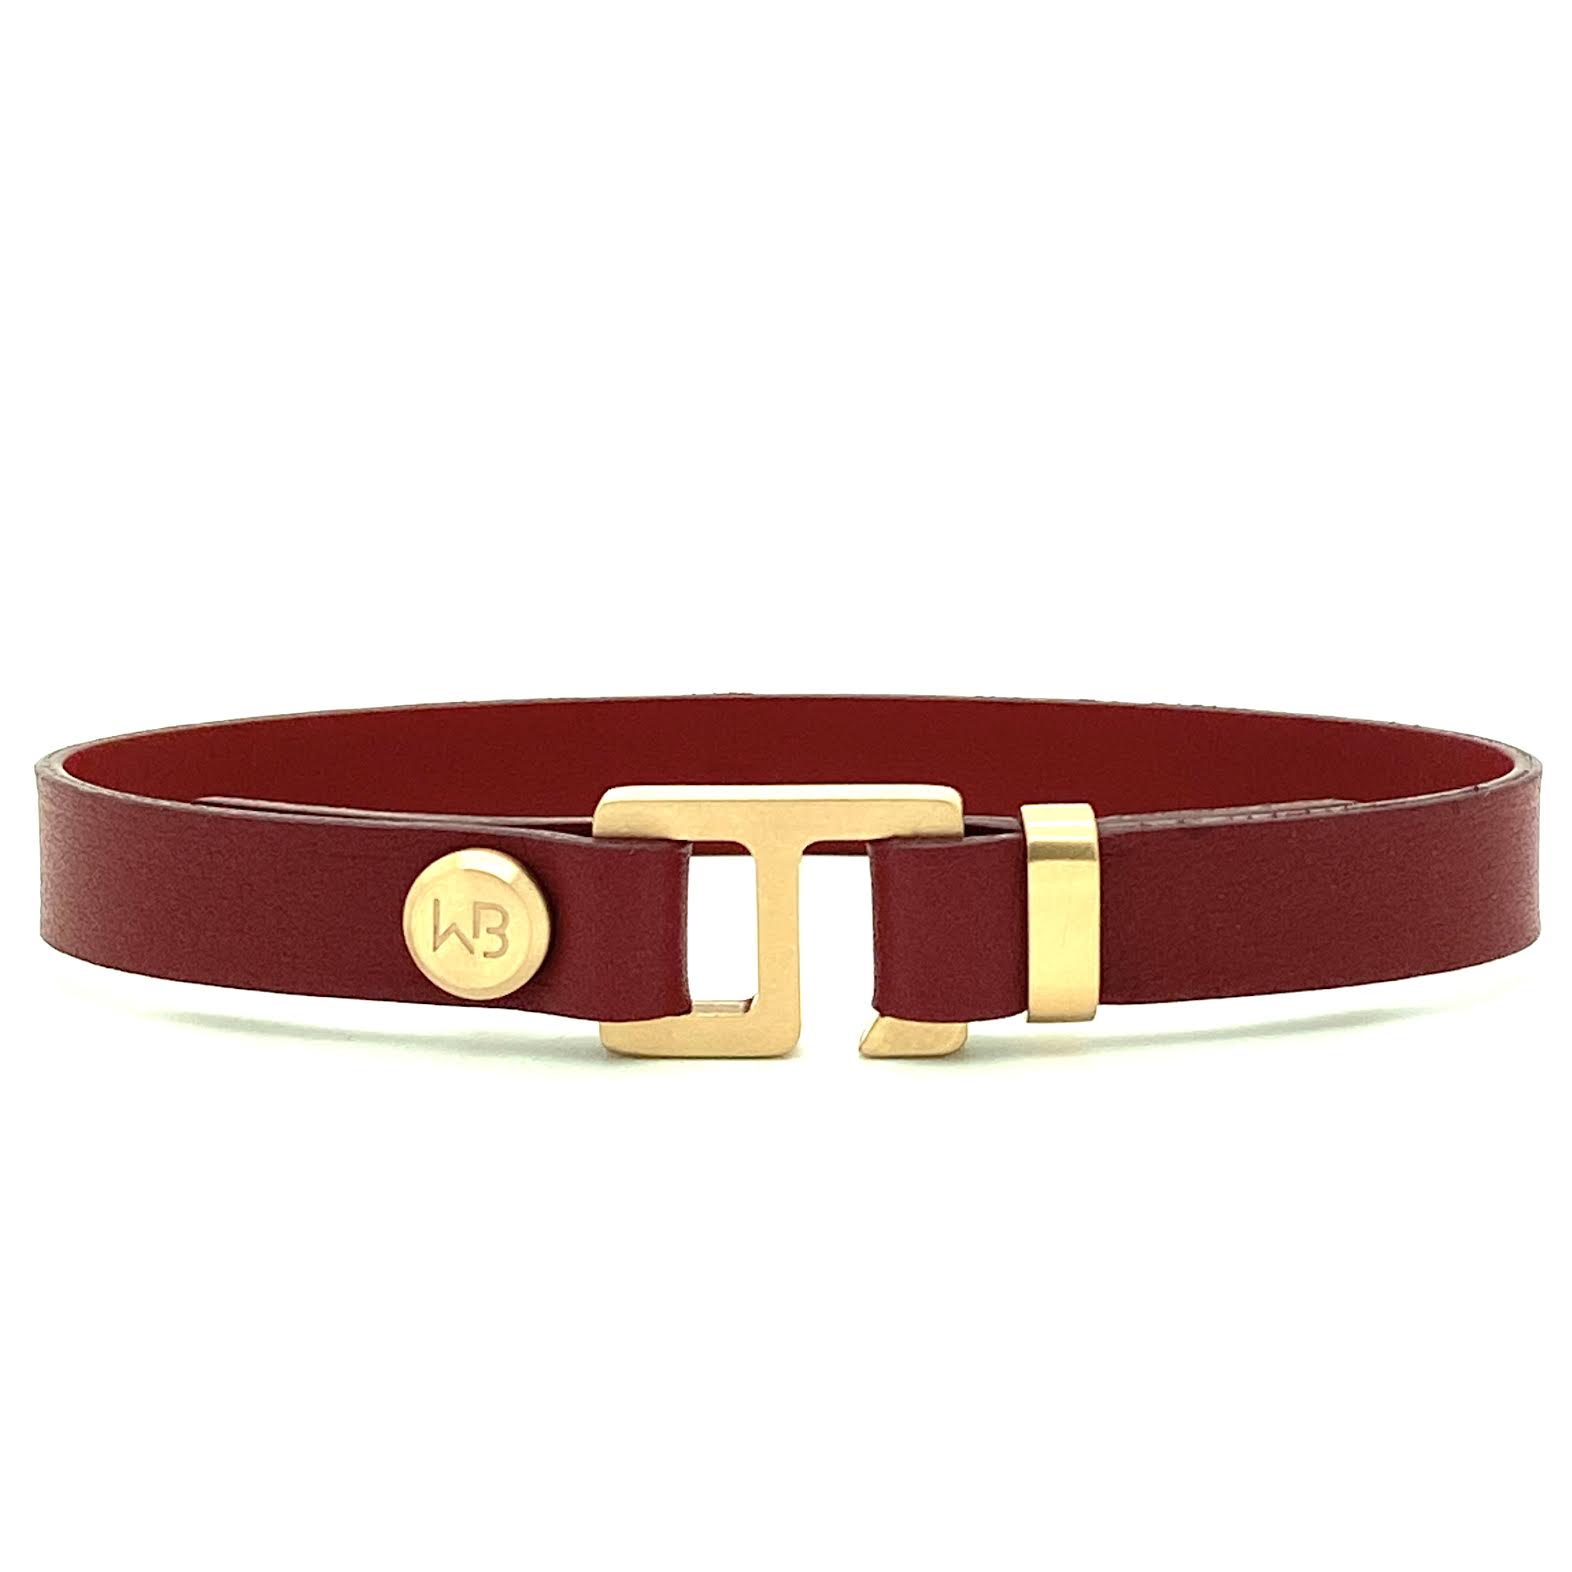 With a trendy, cool modern vibe, this burgundy/black Italian leather cuff bracelet is paired with your choice of brushed stainless steel, brass or black ceramic hardware. Our signature cuff bracelet is a modern staple for your WristBend collection. Made by WristBend